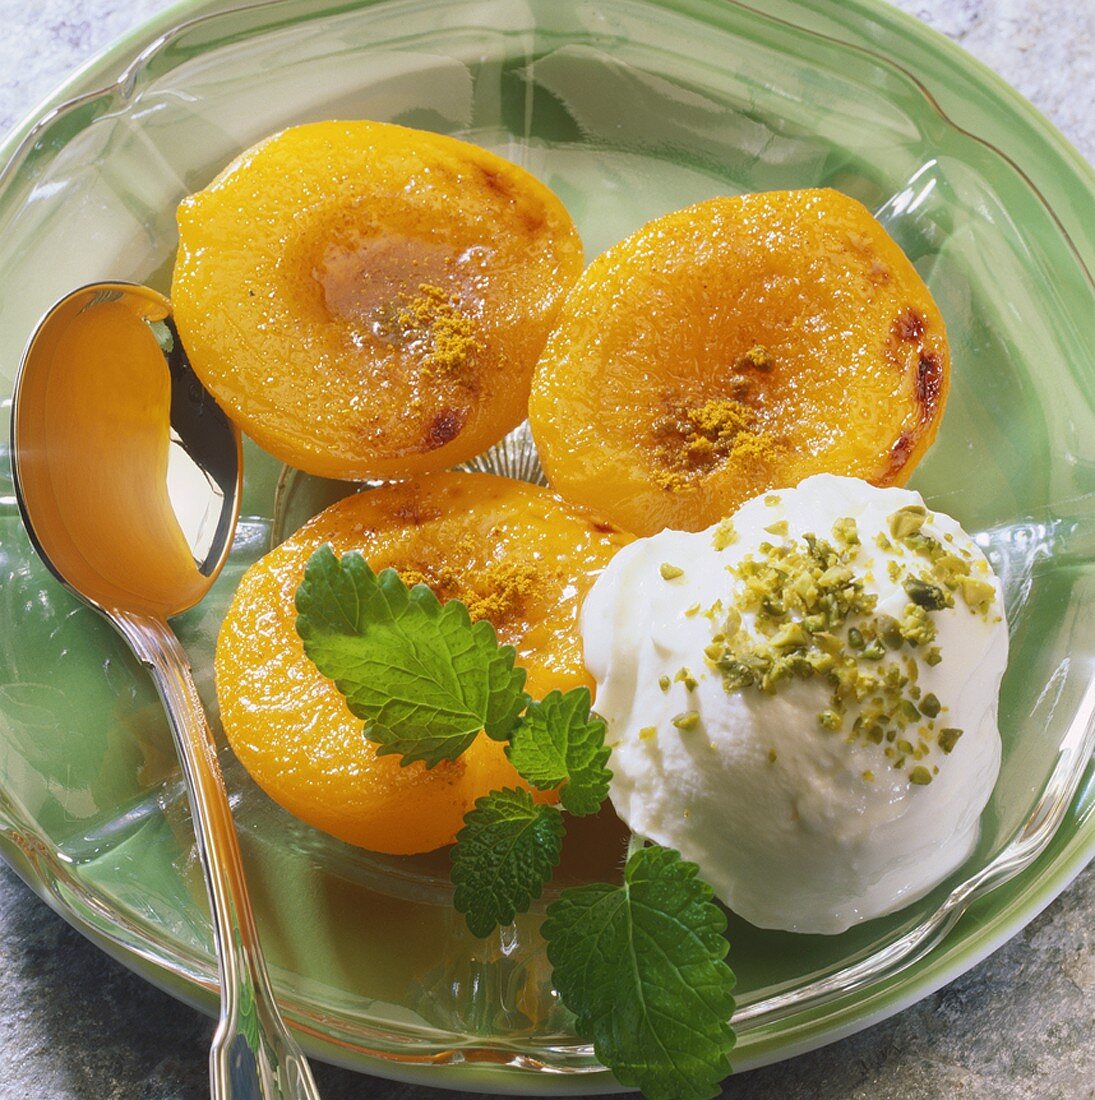 Peaches with curry powder and vanilla ice cream